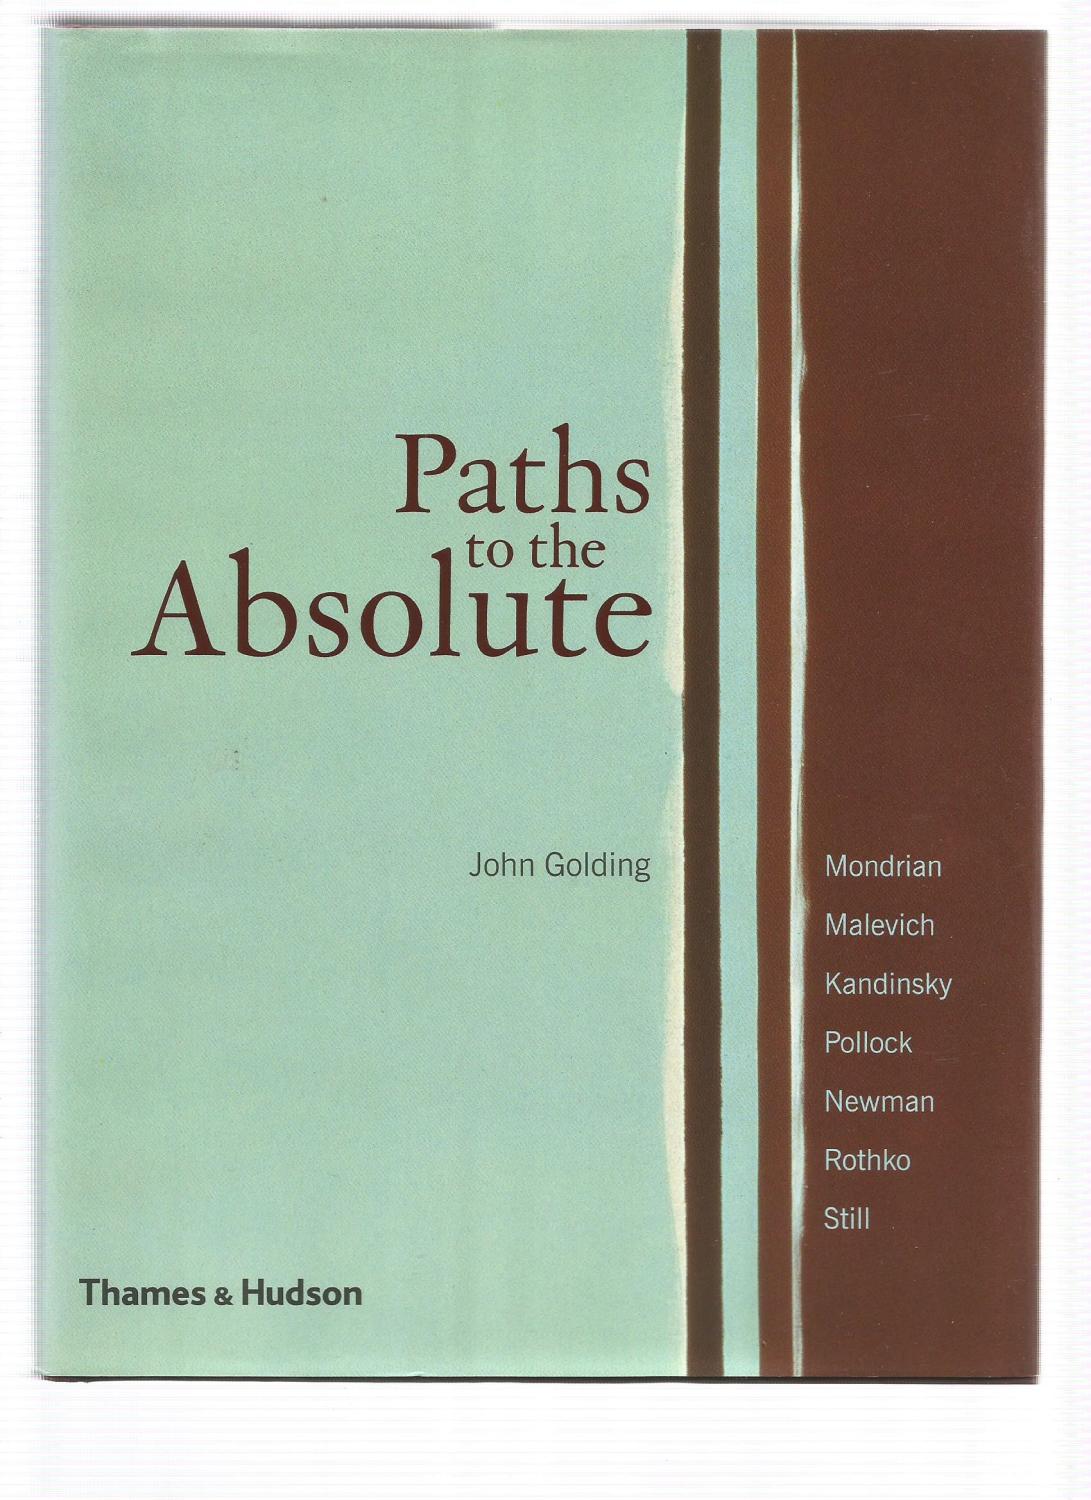 Paths to the Absolute: Mondrian, Malevich, Kandinsky, Pollock, Newman, Rothko and Still